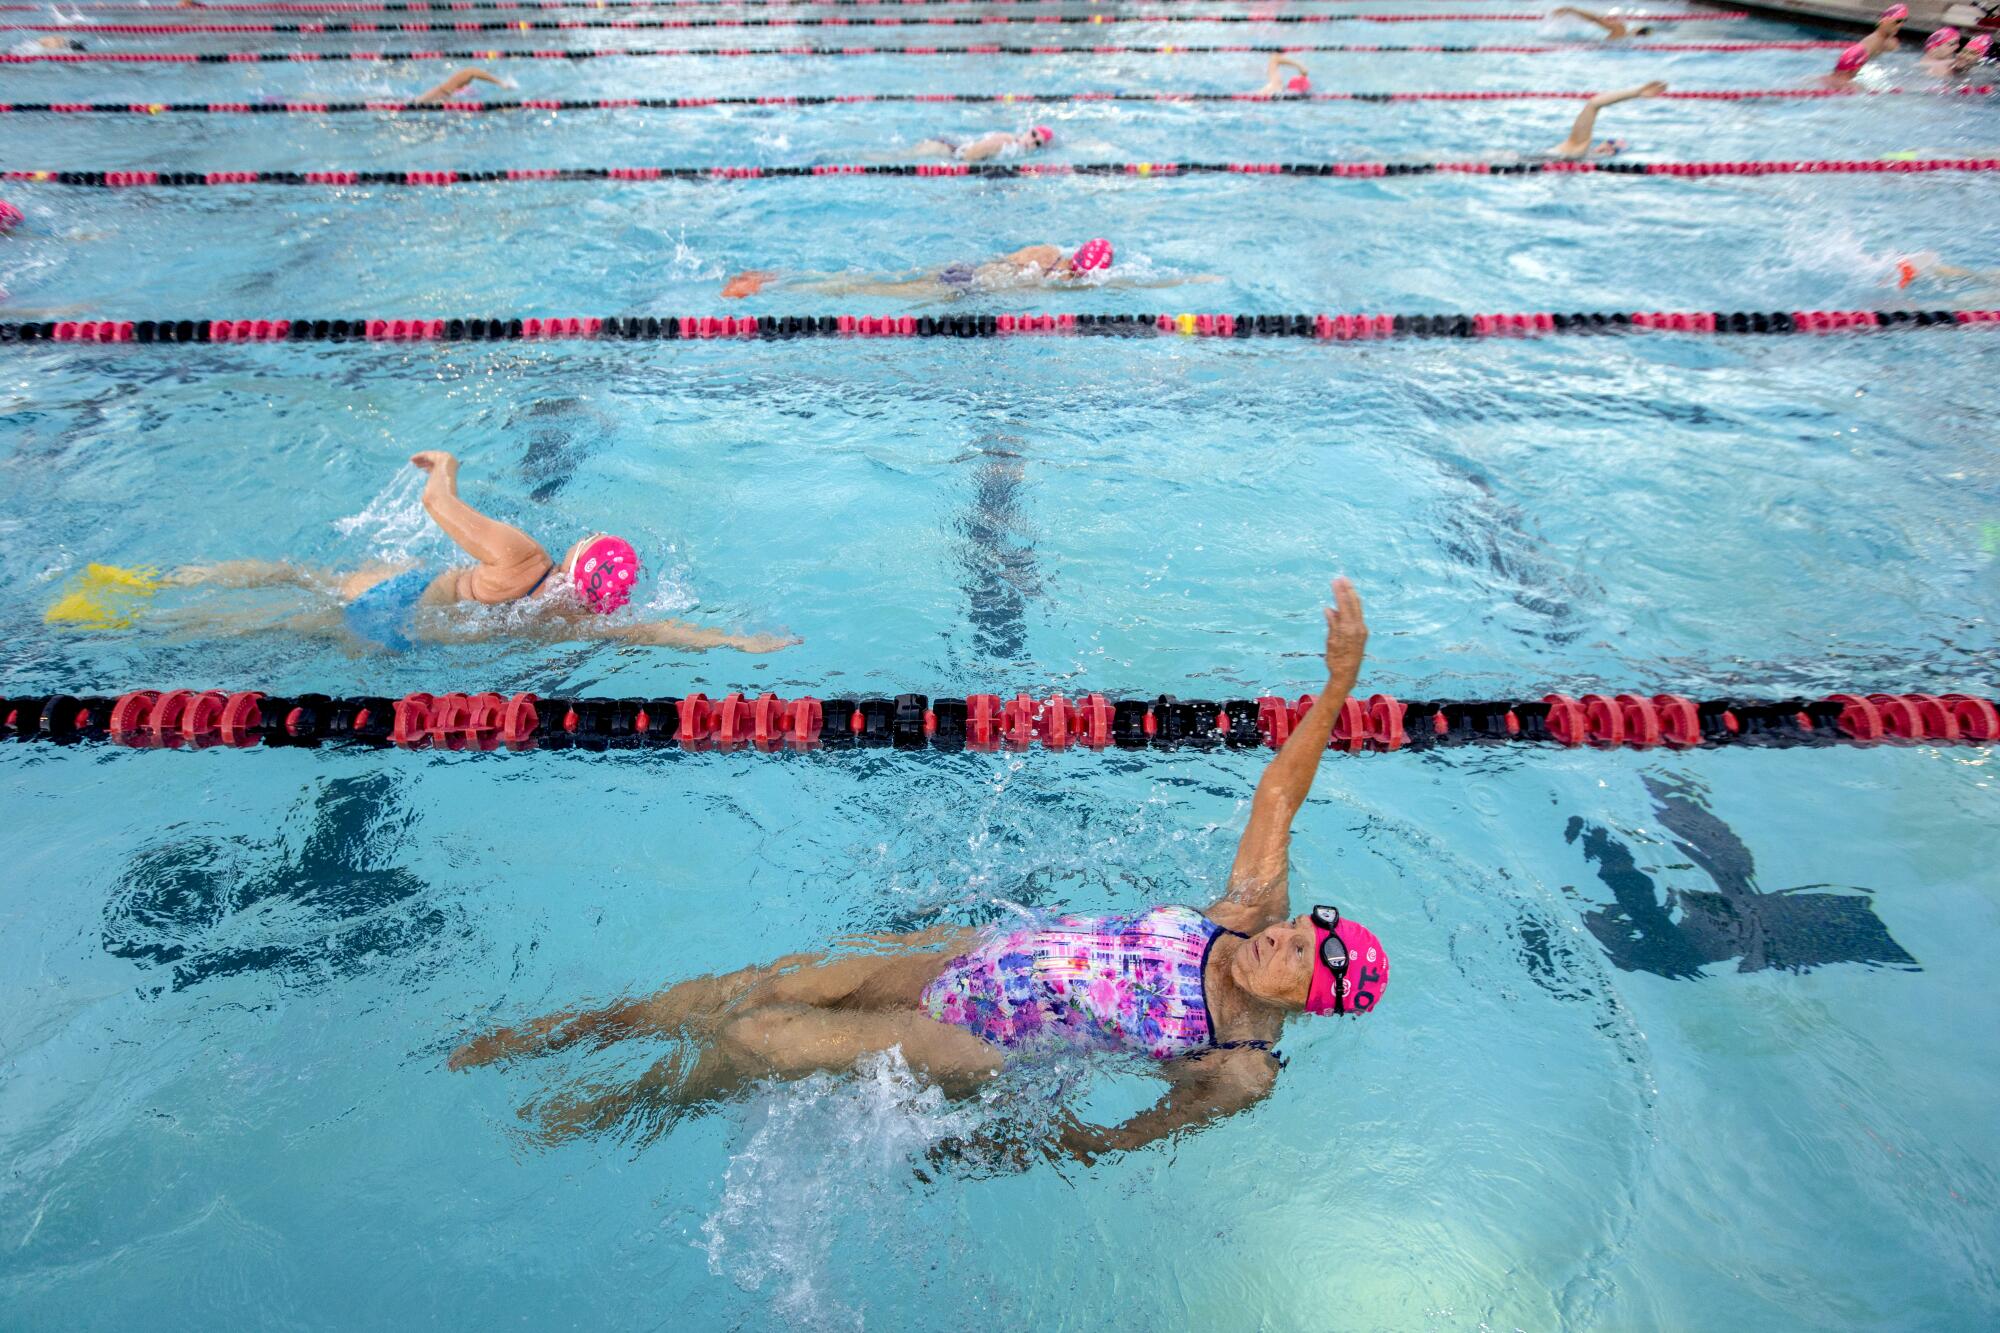 A woman in a pink and blue bathing suit does the backstroke in a pool with other swimmers.